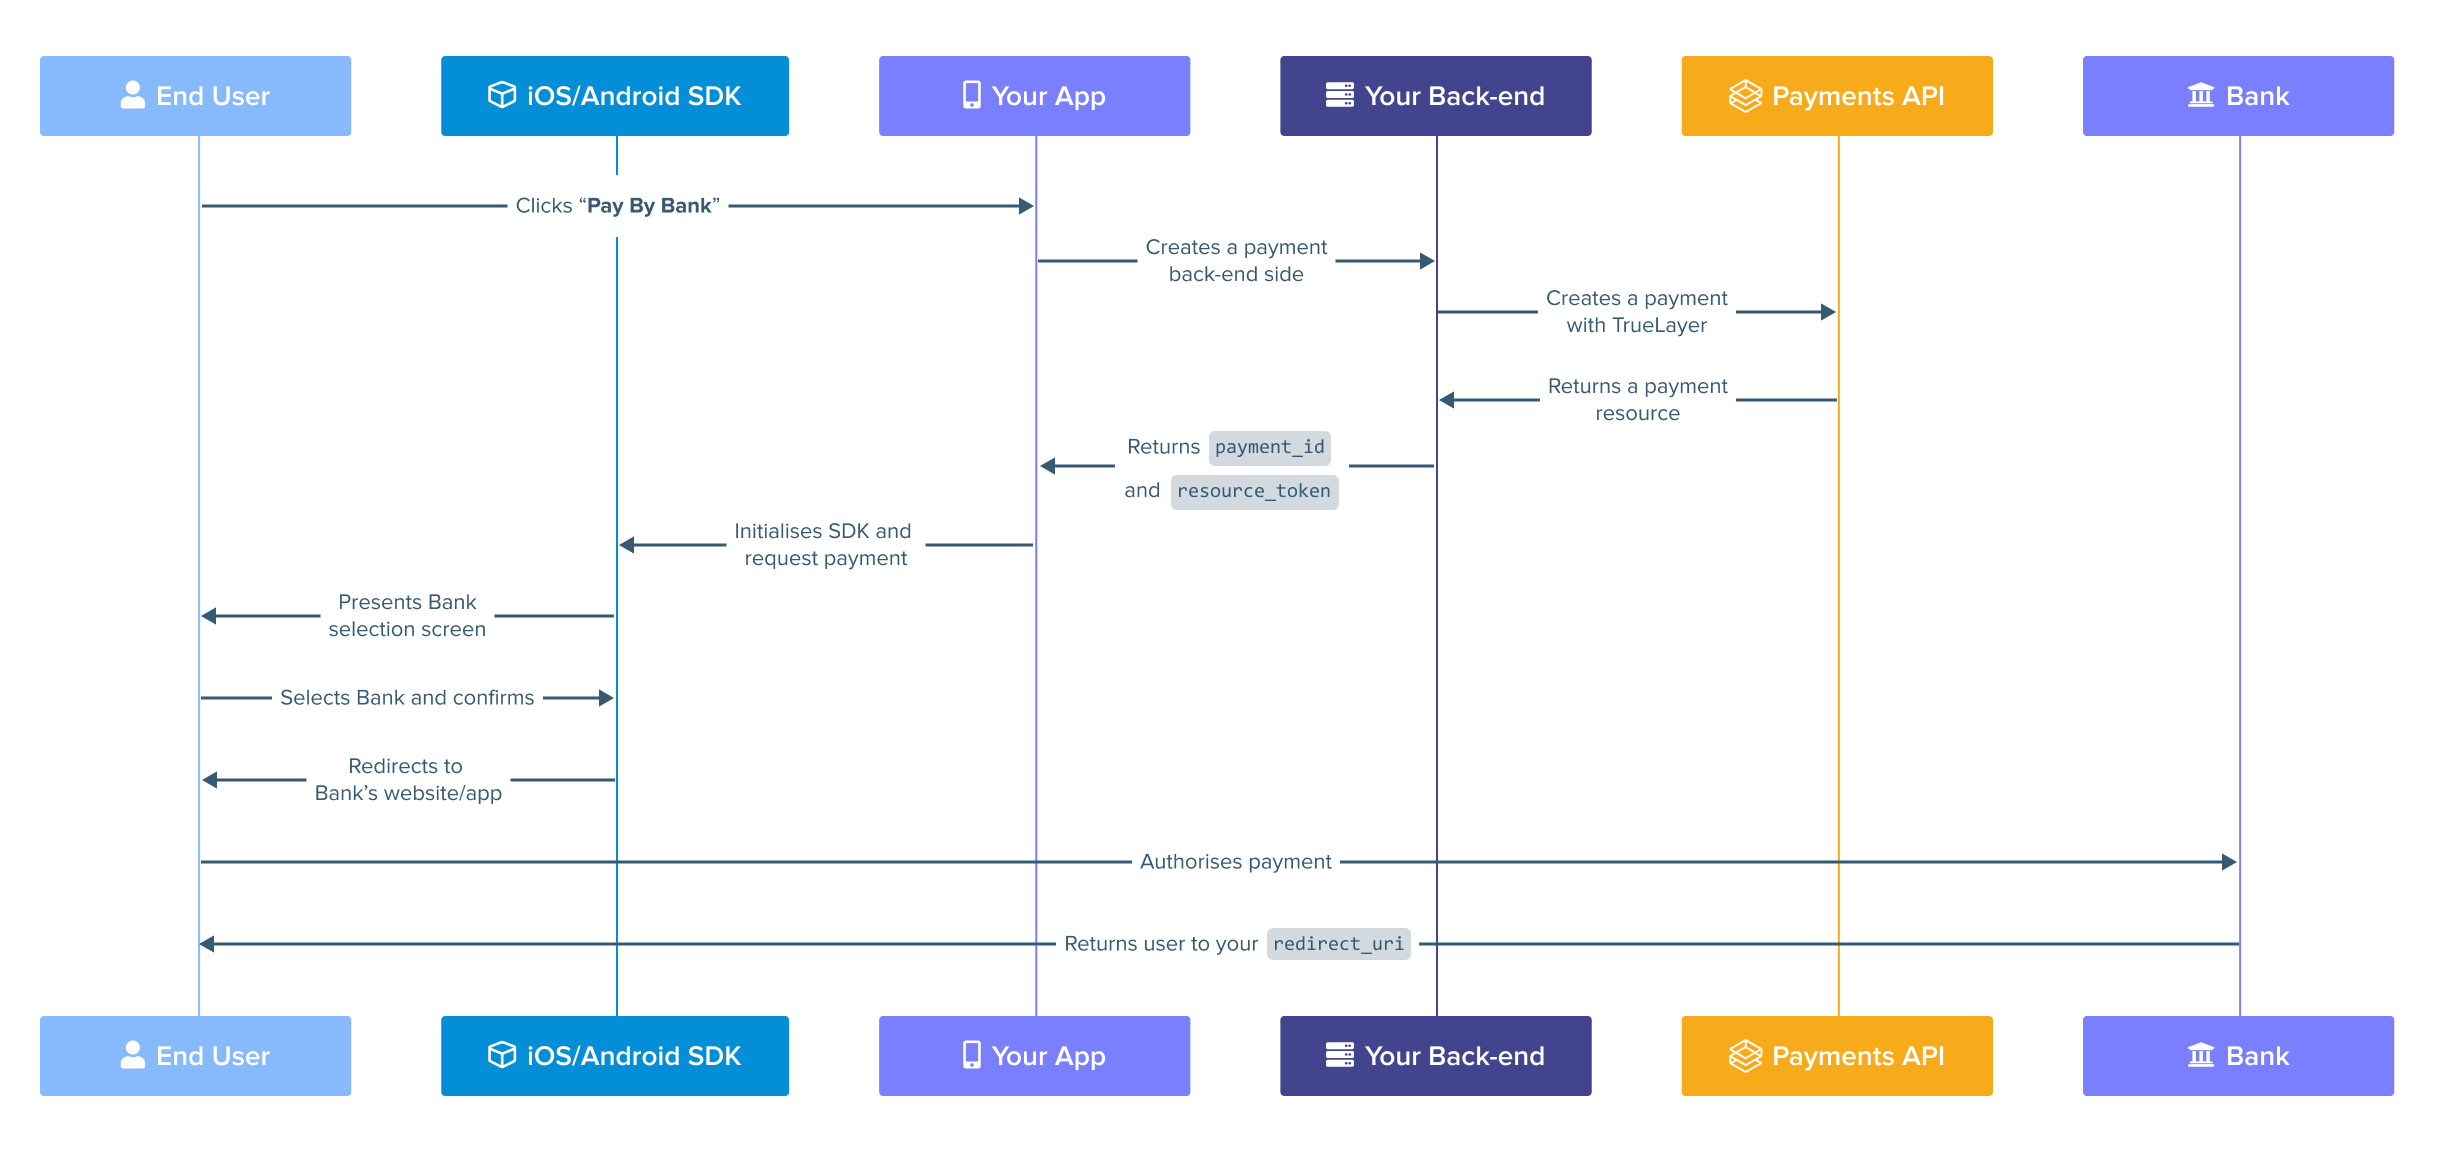 Image containing a diagram that shows the payment journey with mobile SDK integration.